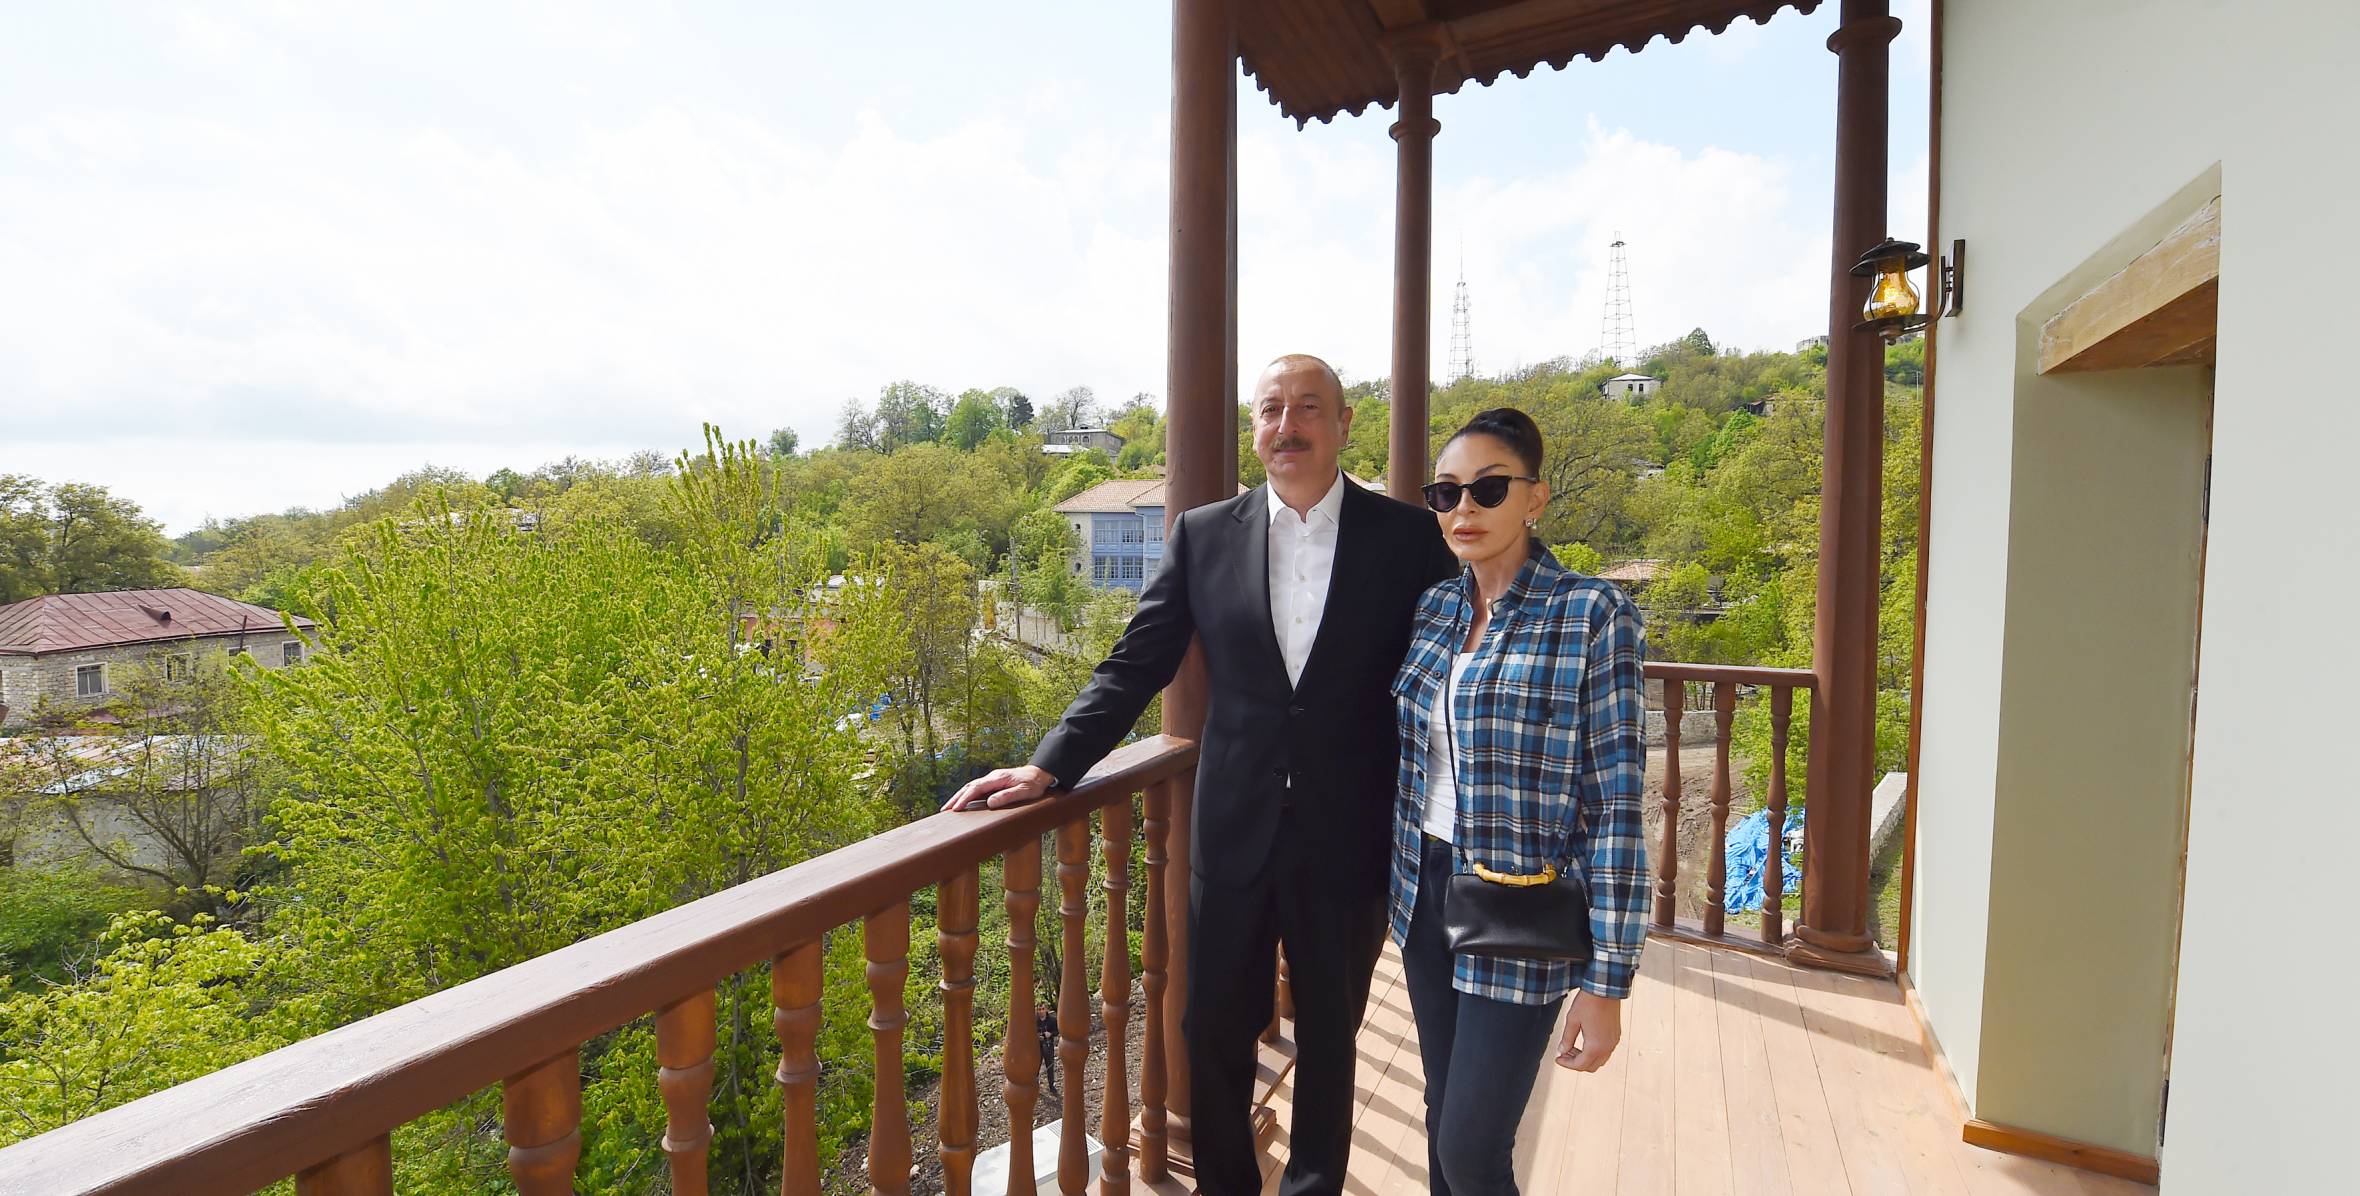 Ilham Aliyev and First Lady Mehriban Aliyeva participated in opening of Mehmandarovs’ Estate Complex in Shusha